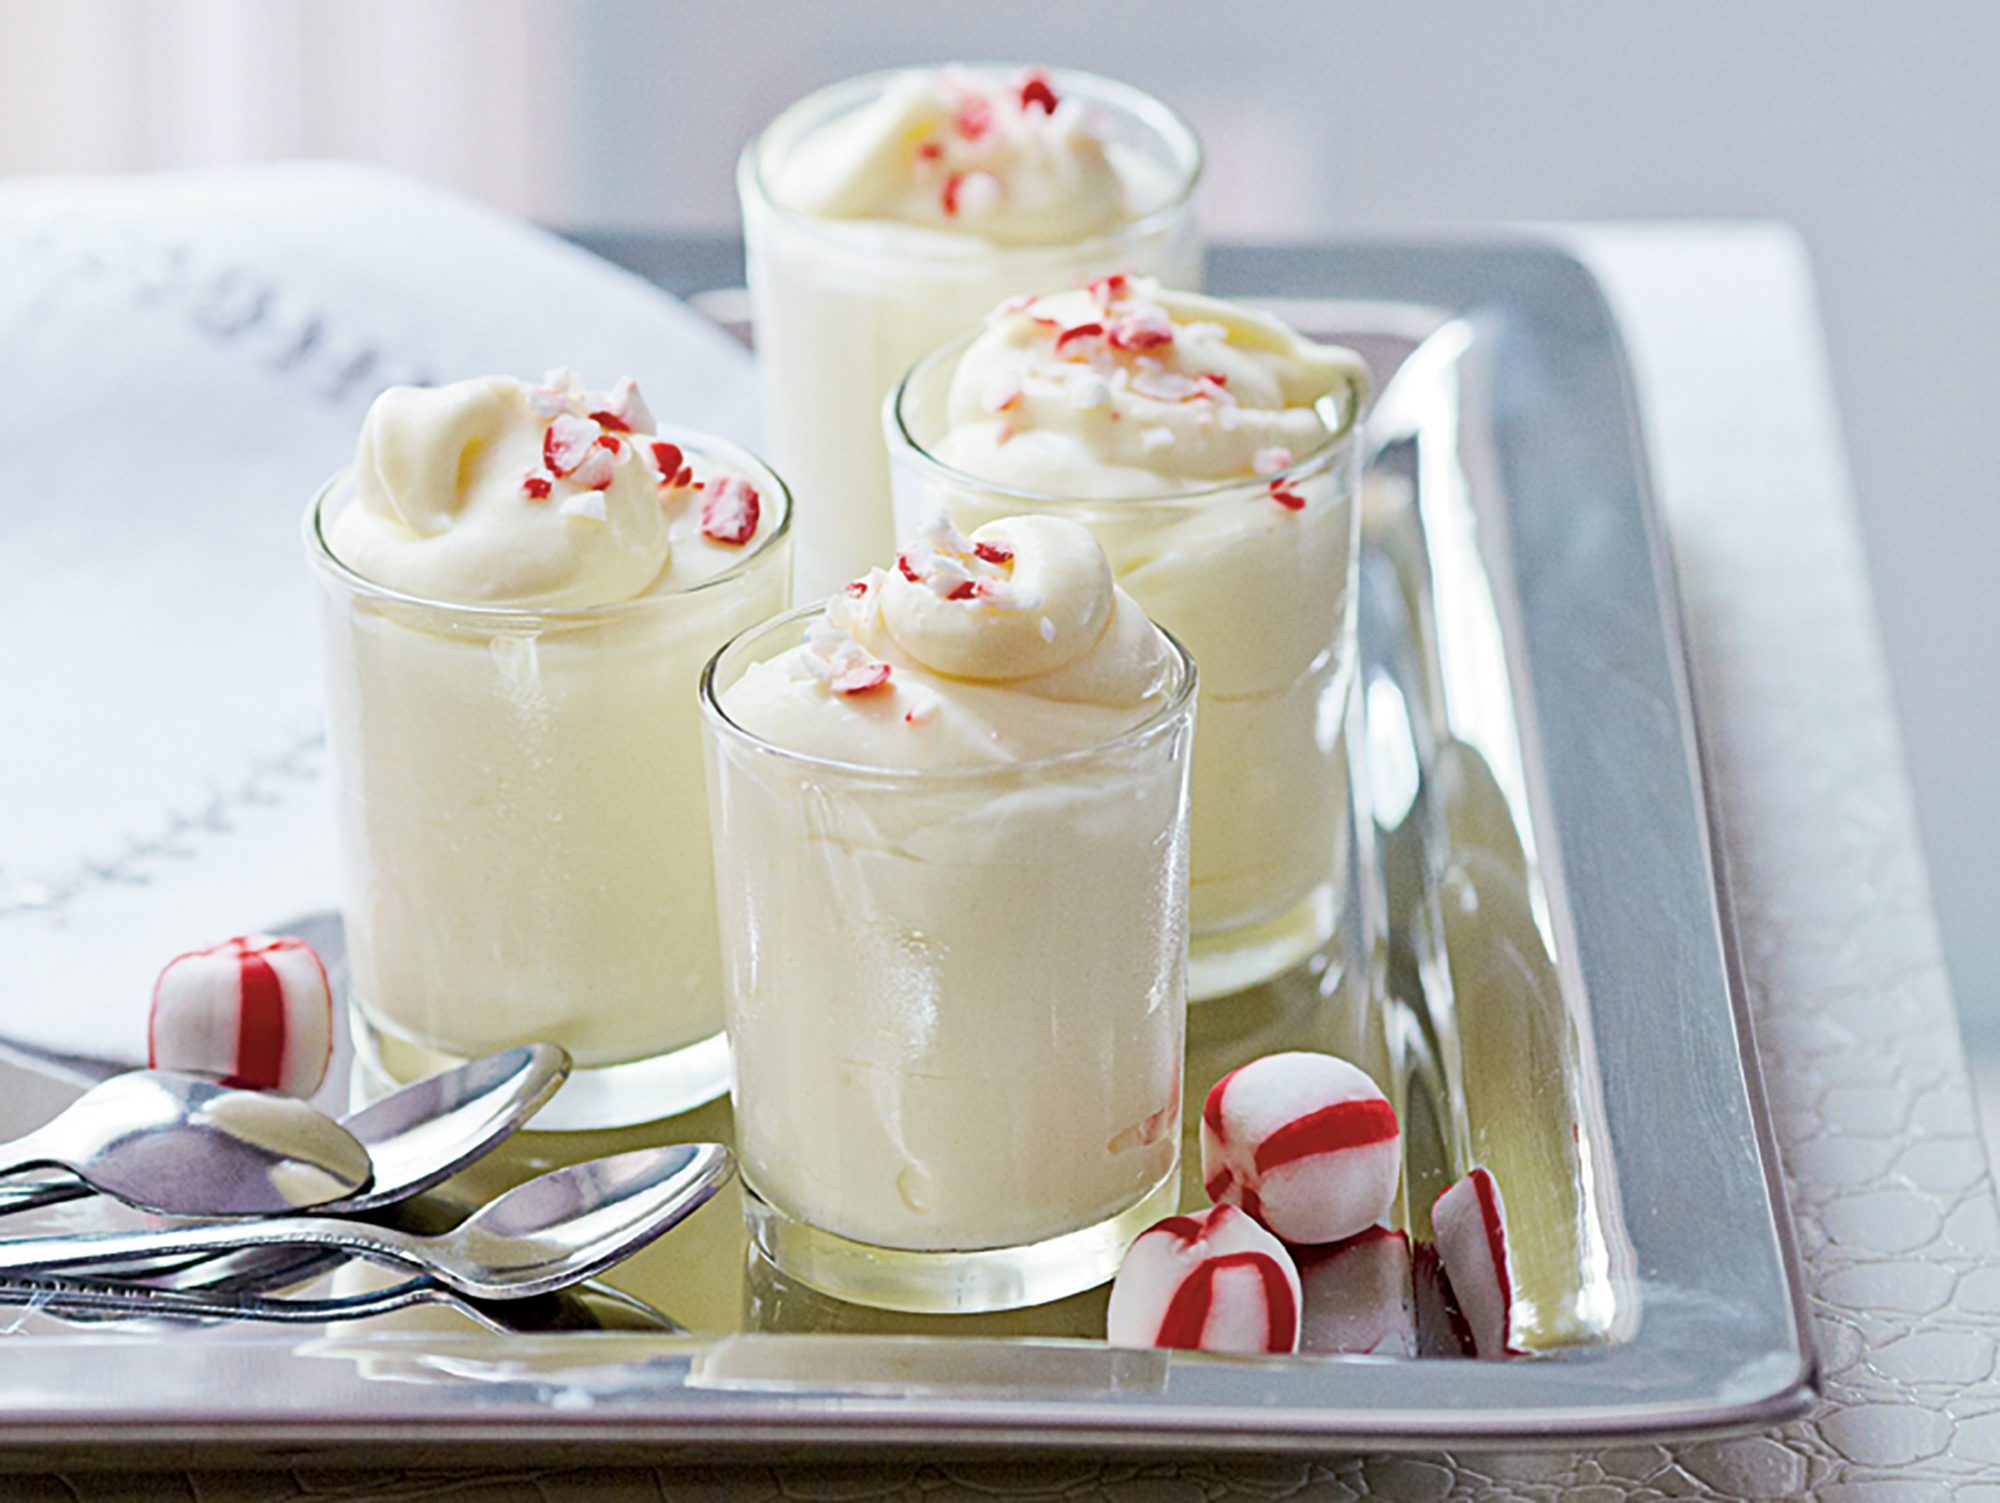 Candy Cane Chocolate Cups filled with Peppermint Mousse